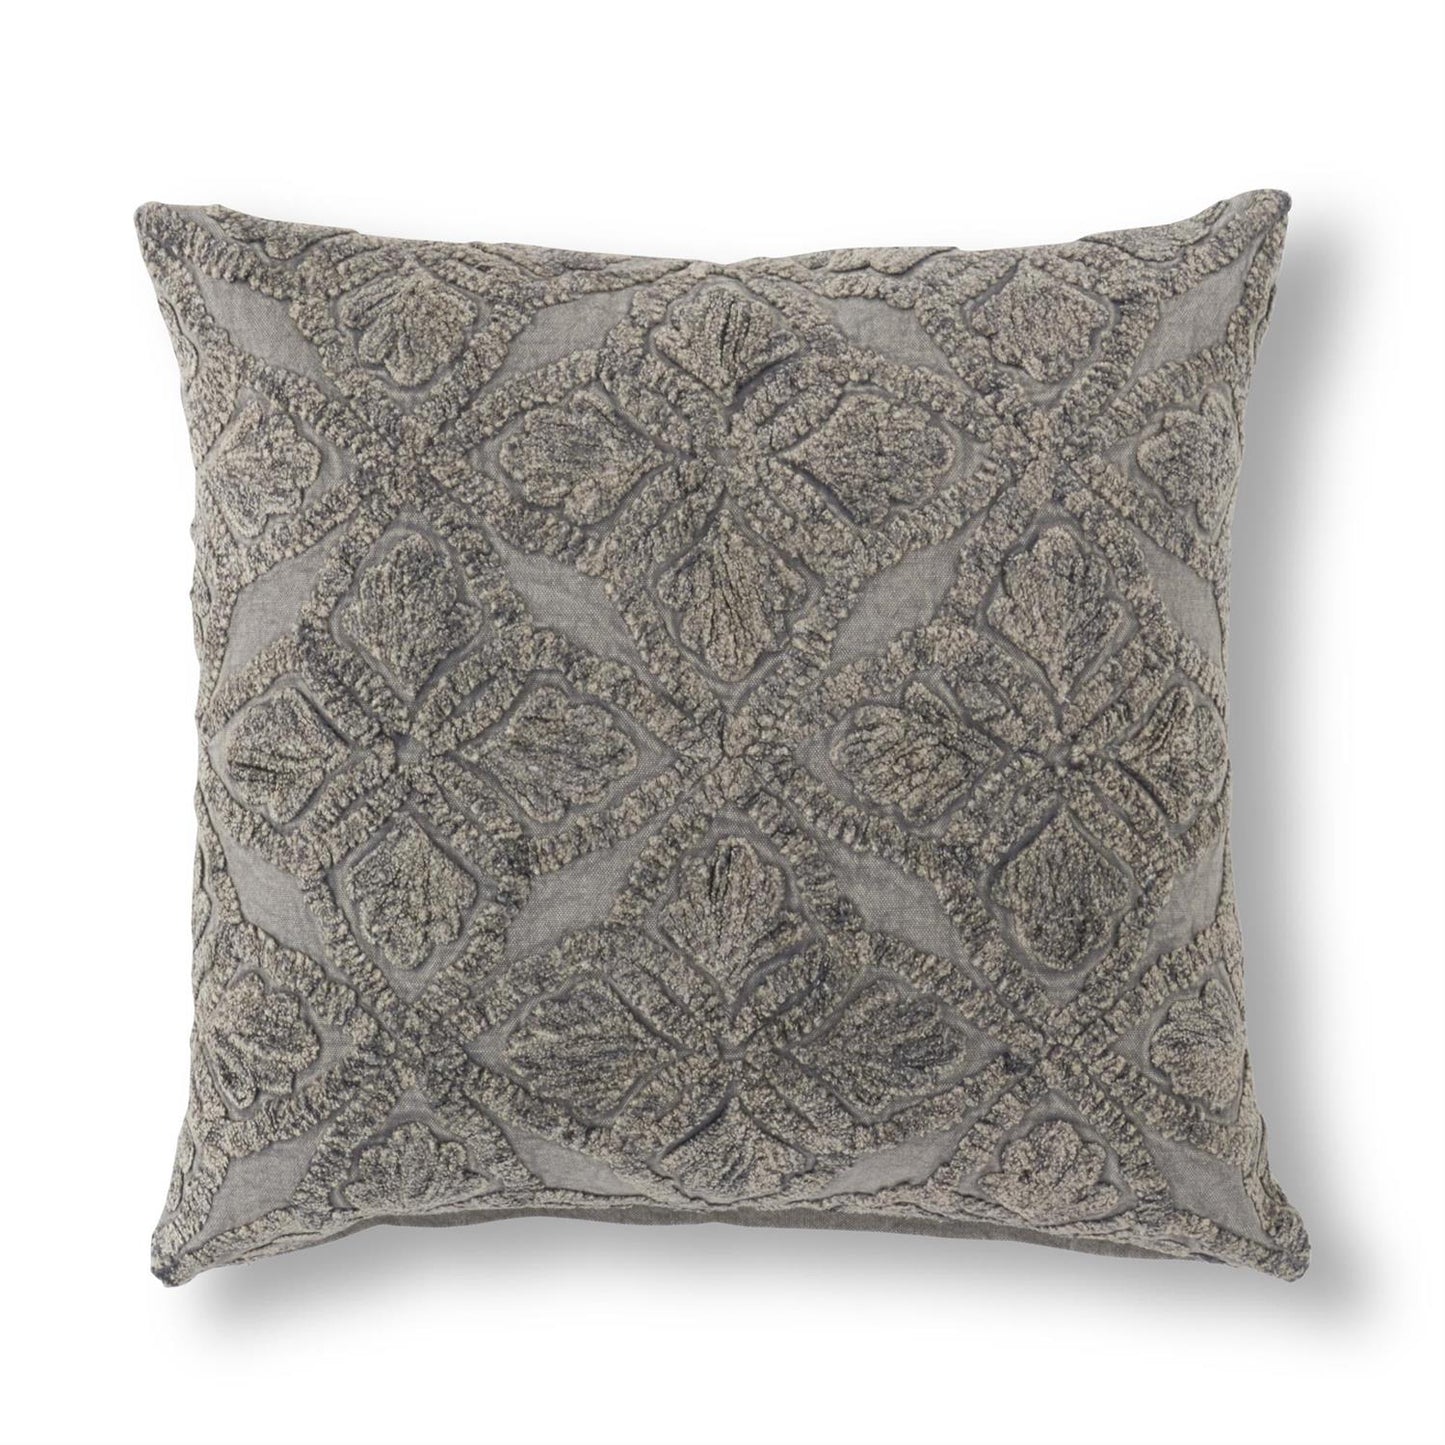 COTTON STONE WASHED GRAY FLORAL EMBROIDERED PILLOW